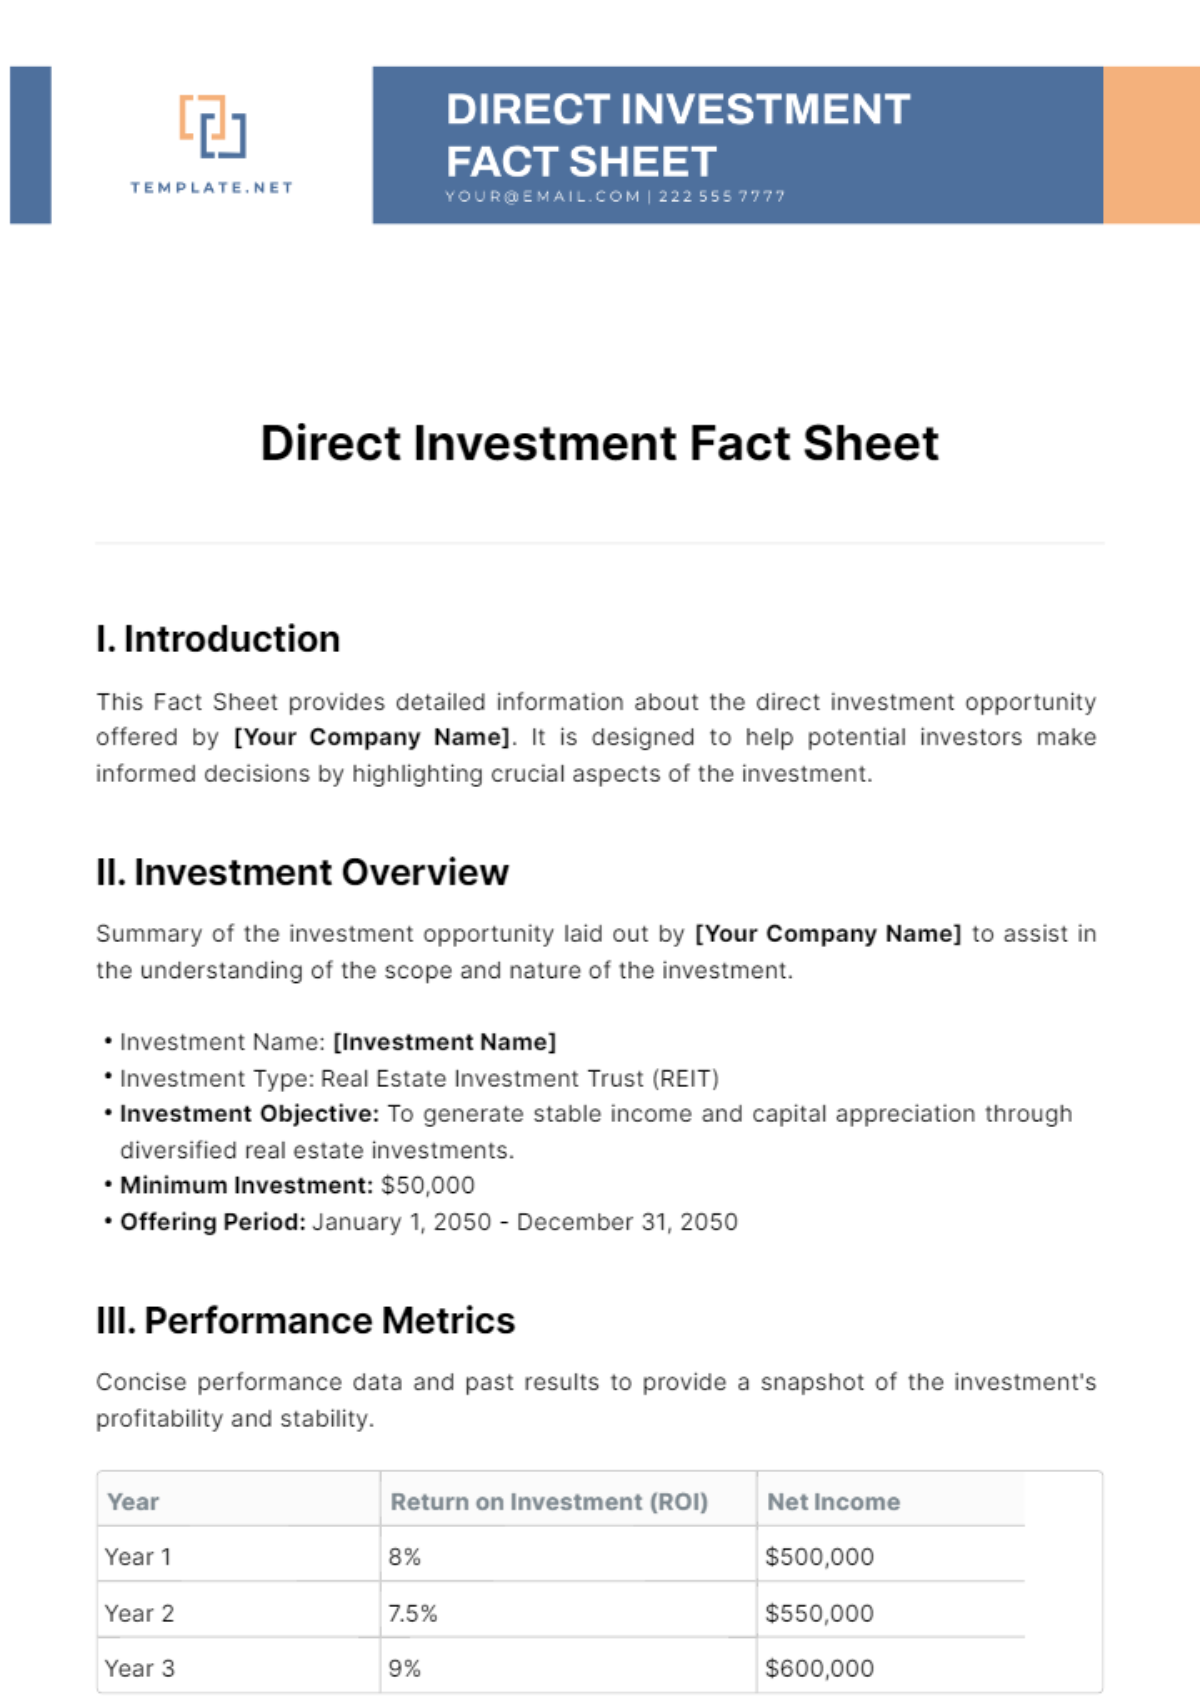 Direct Investment Fact Sheet Template